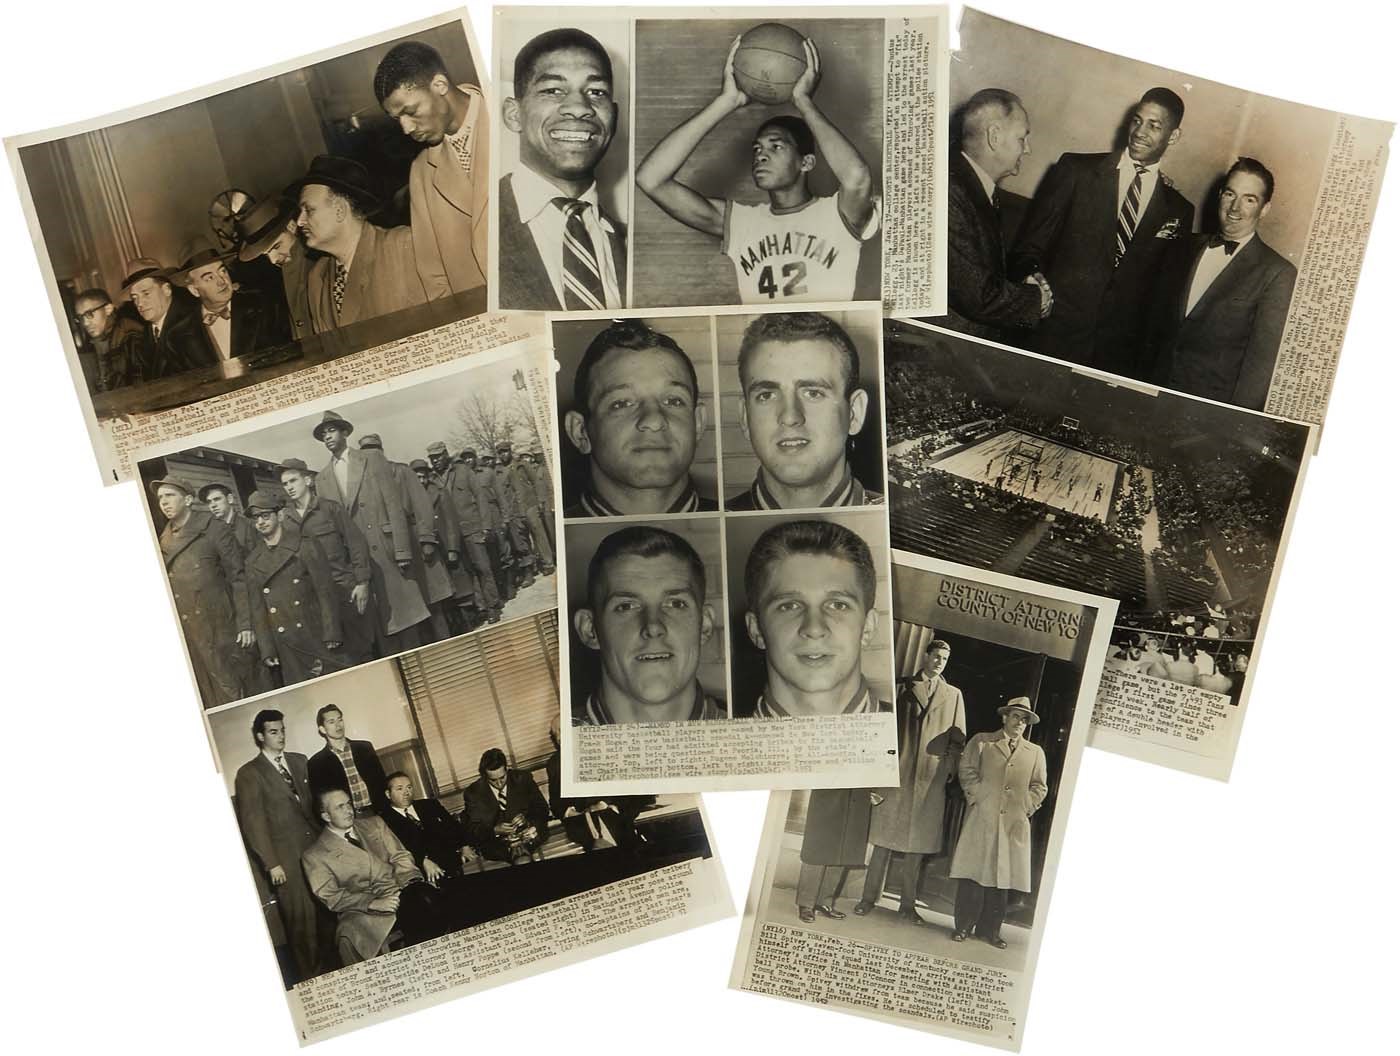 - 1950-51 CCNY Basketball Point Shaving Scandal Wire Photos (7)